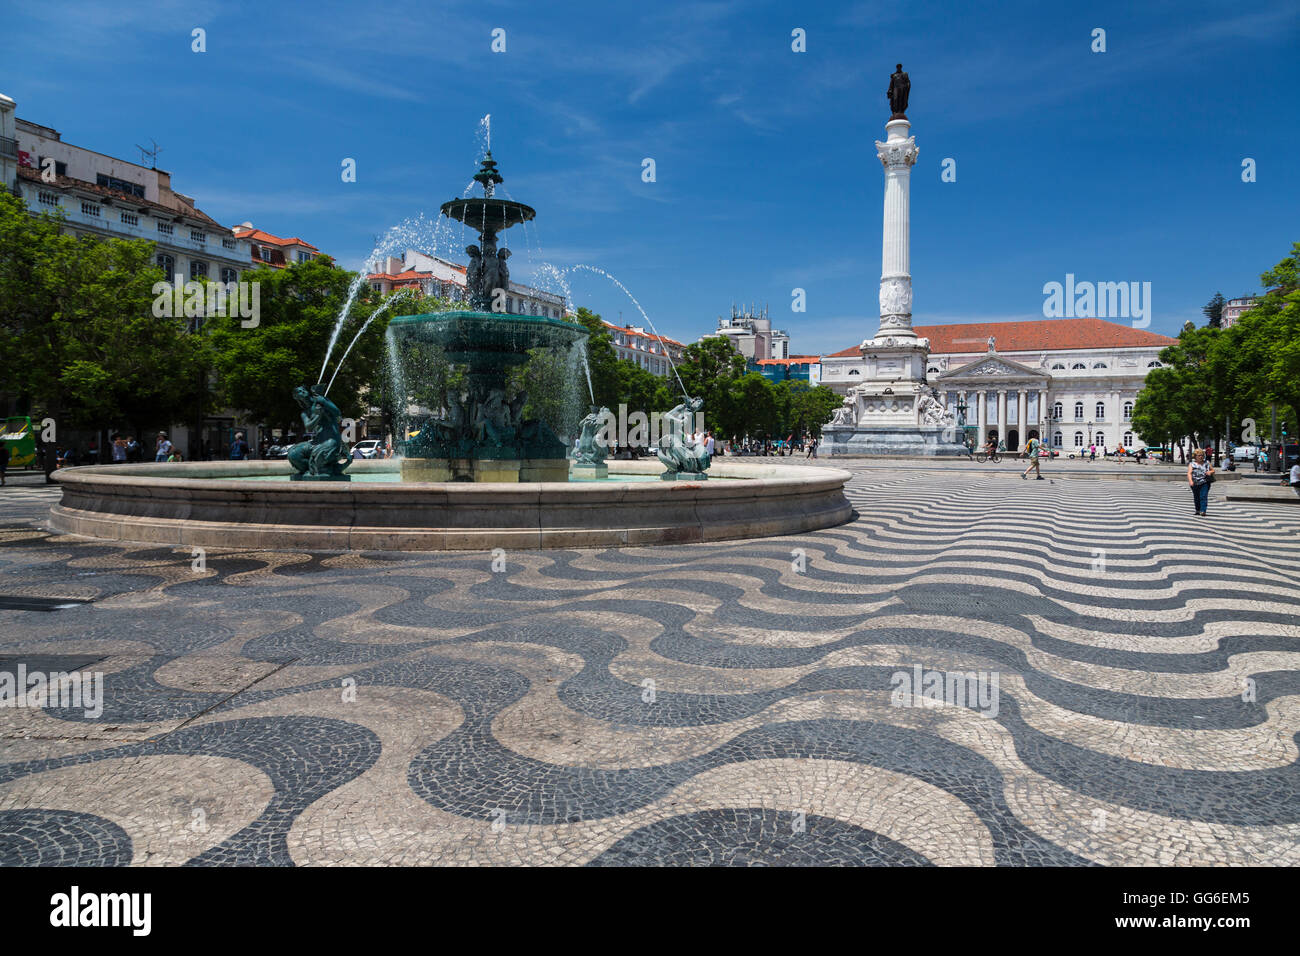 Fountain frames the old palace in Praca de Dom Pedro IV (Rossio Square), Pombaline Downtown, Lisbon, Portugal, Europe Stock Photo